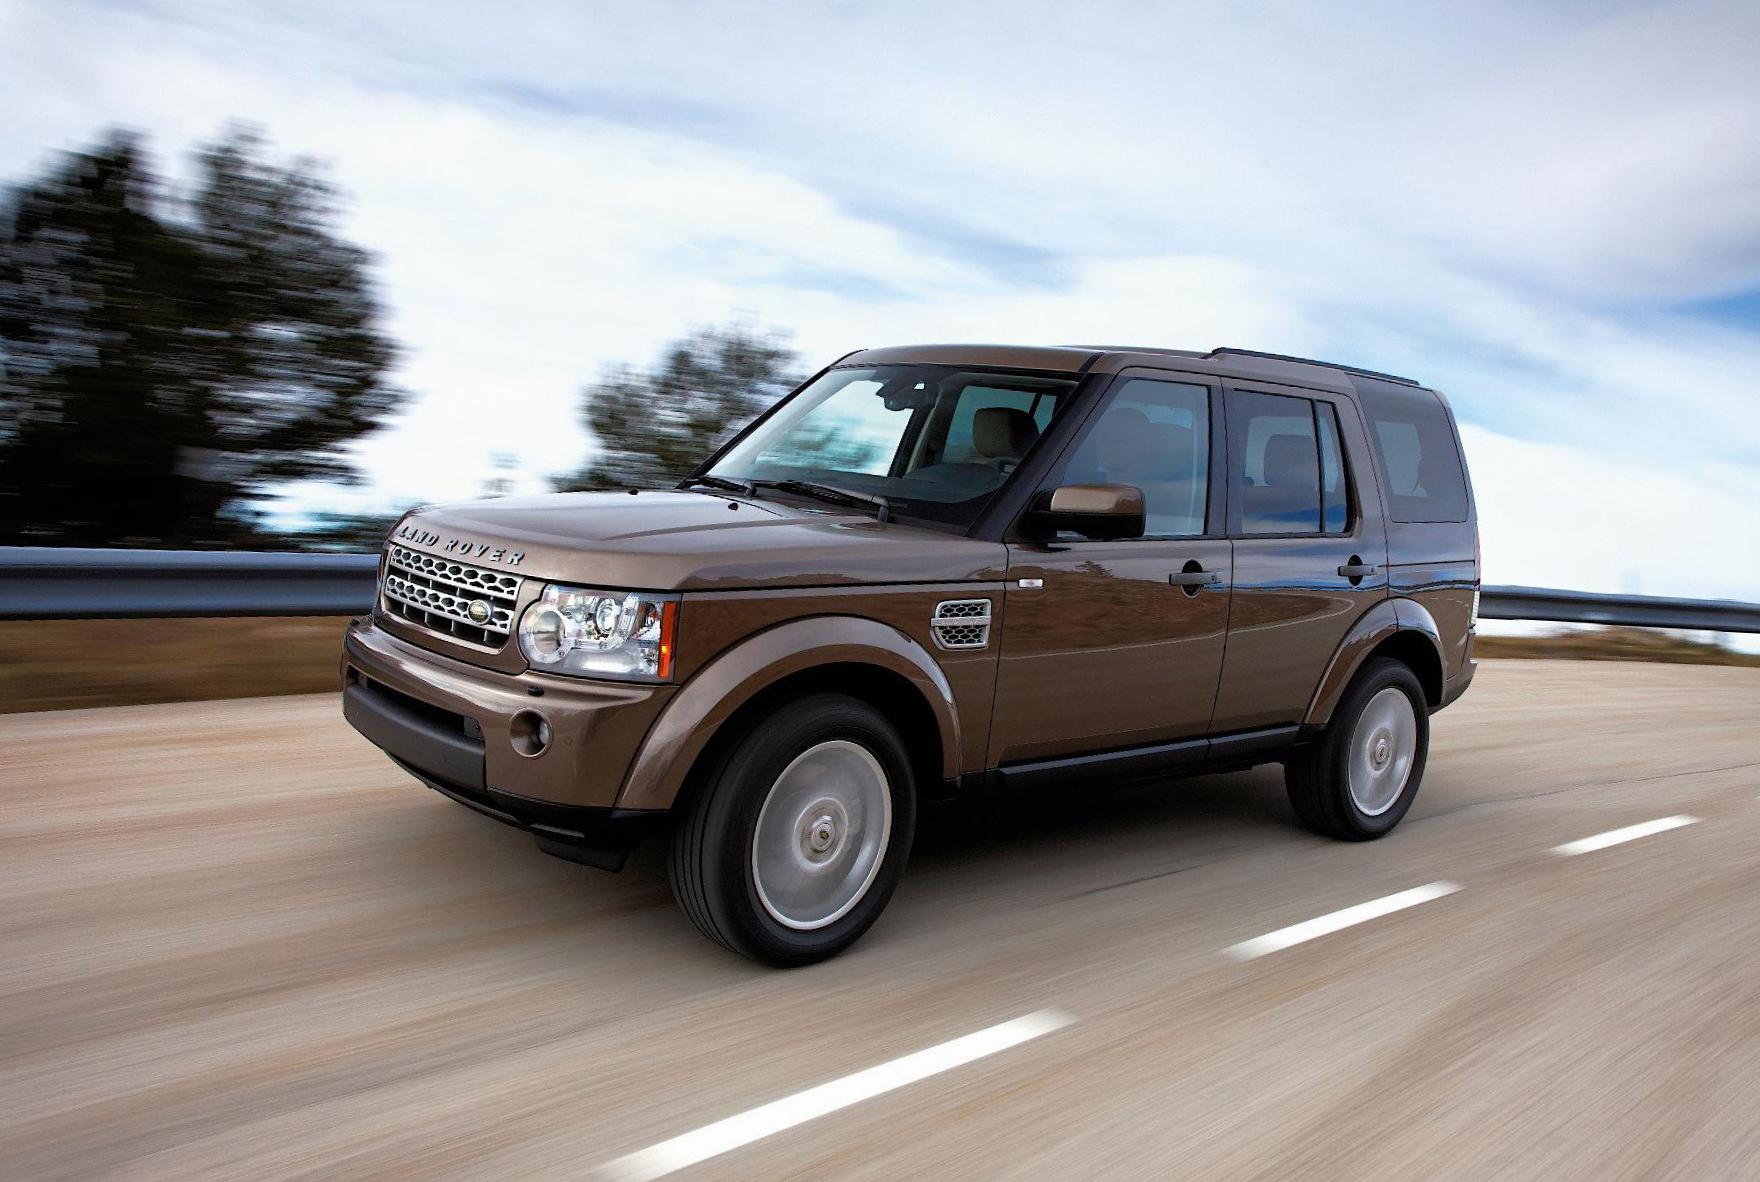 Land Rover Discovery 4 Photos and Specs. Photo: Discovery 4 Land Rover ...